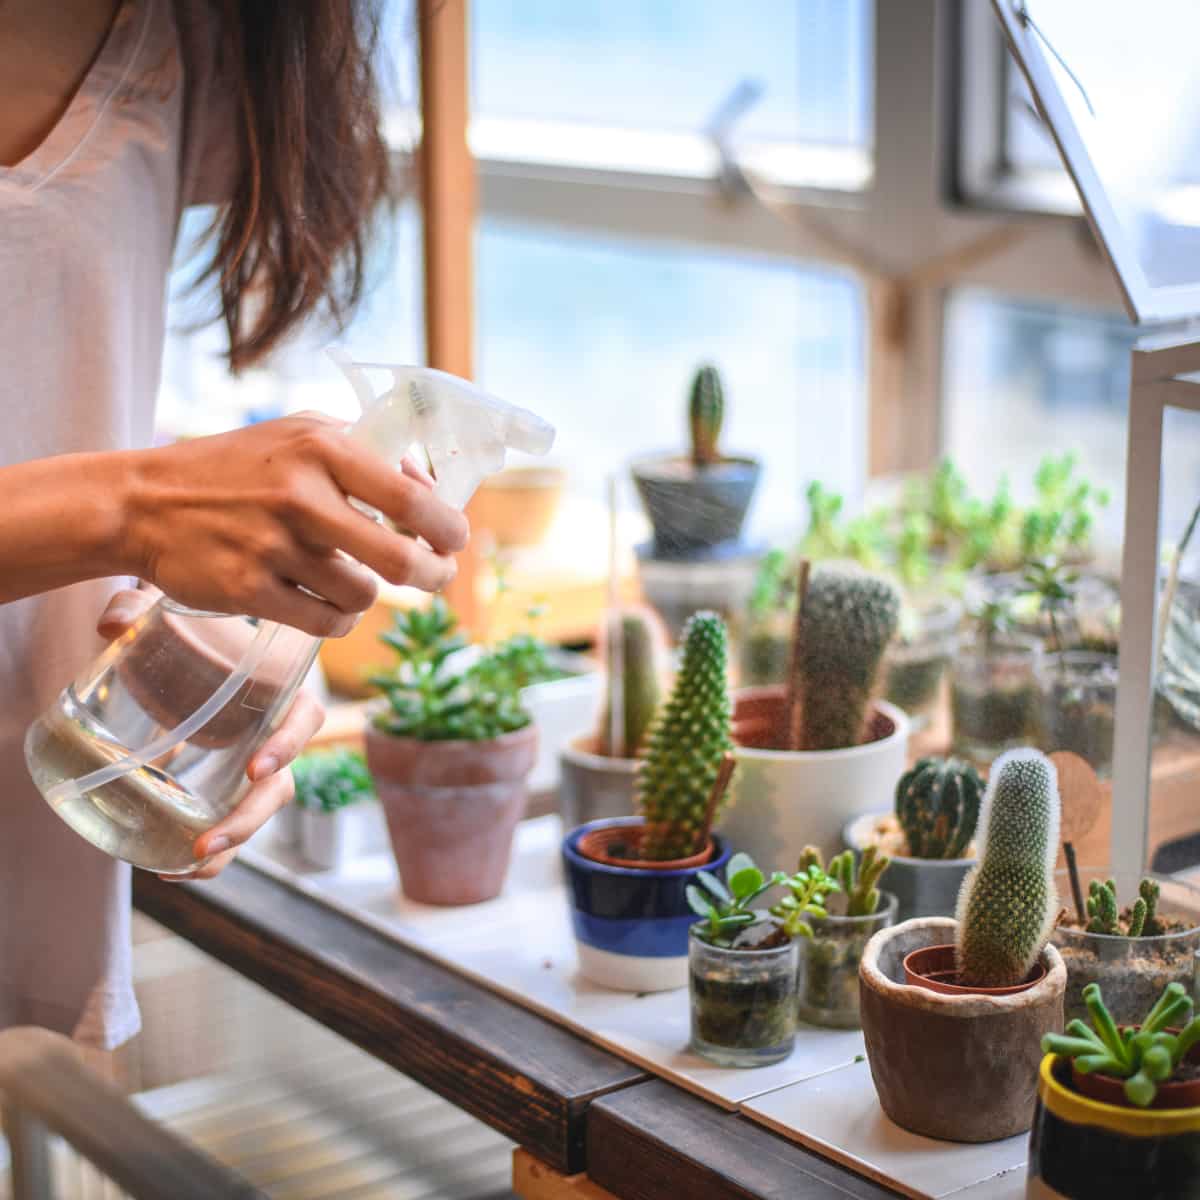 Person watering many succulent plants on a table.